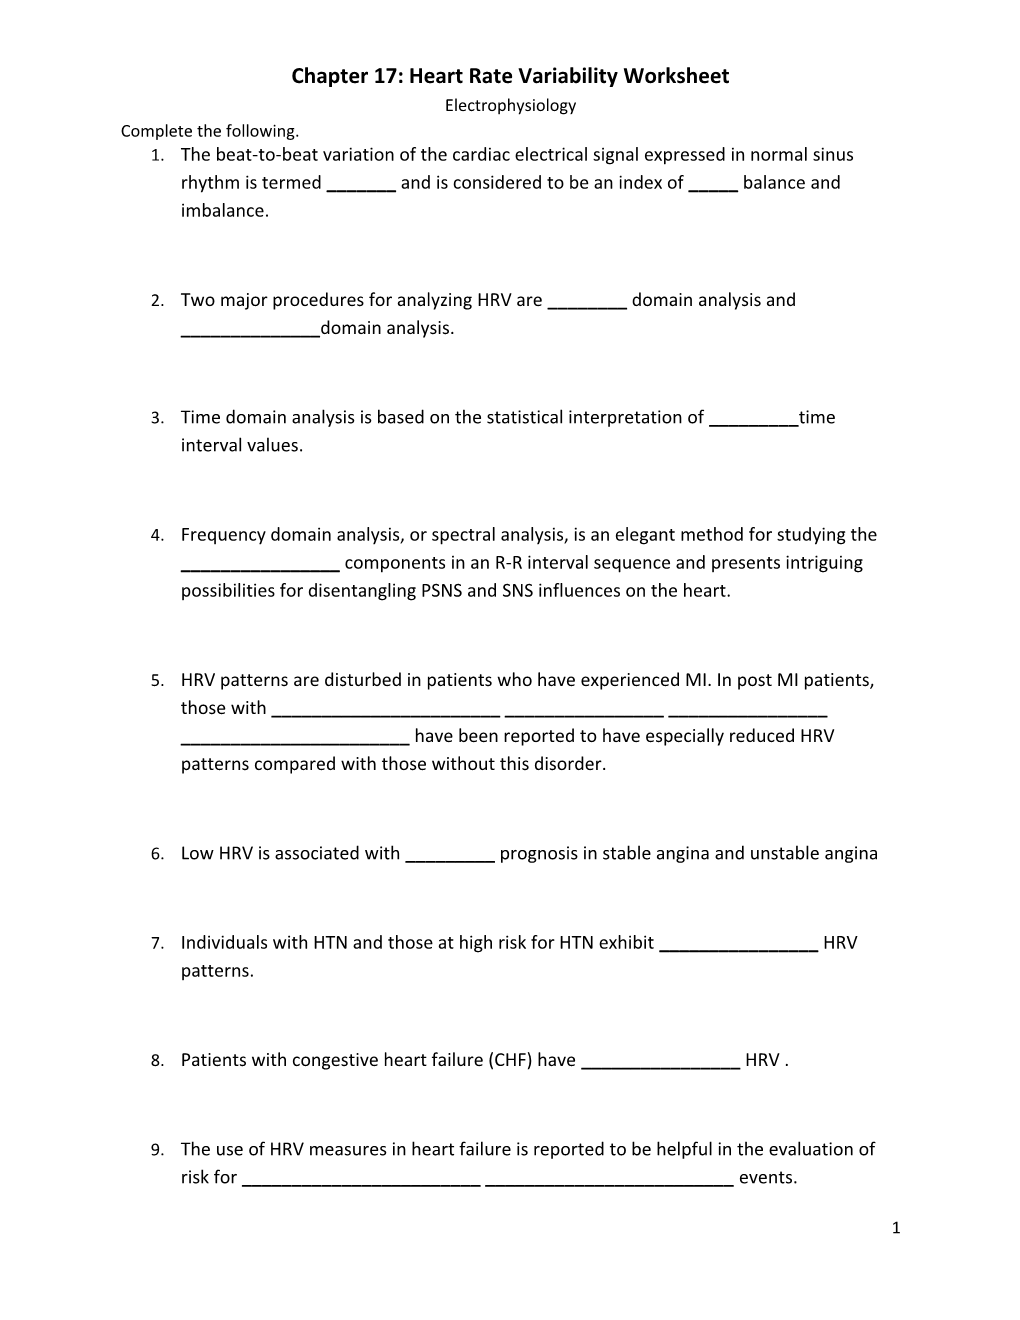 Chapter 17: Heart Rate Variability Worksheet